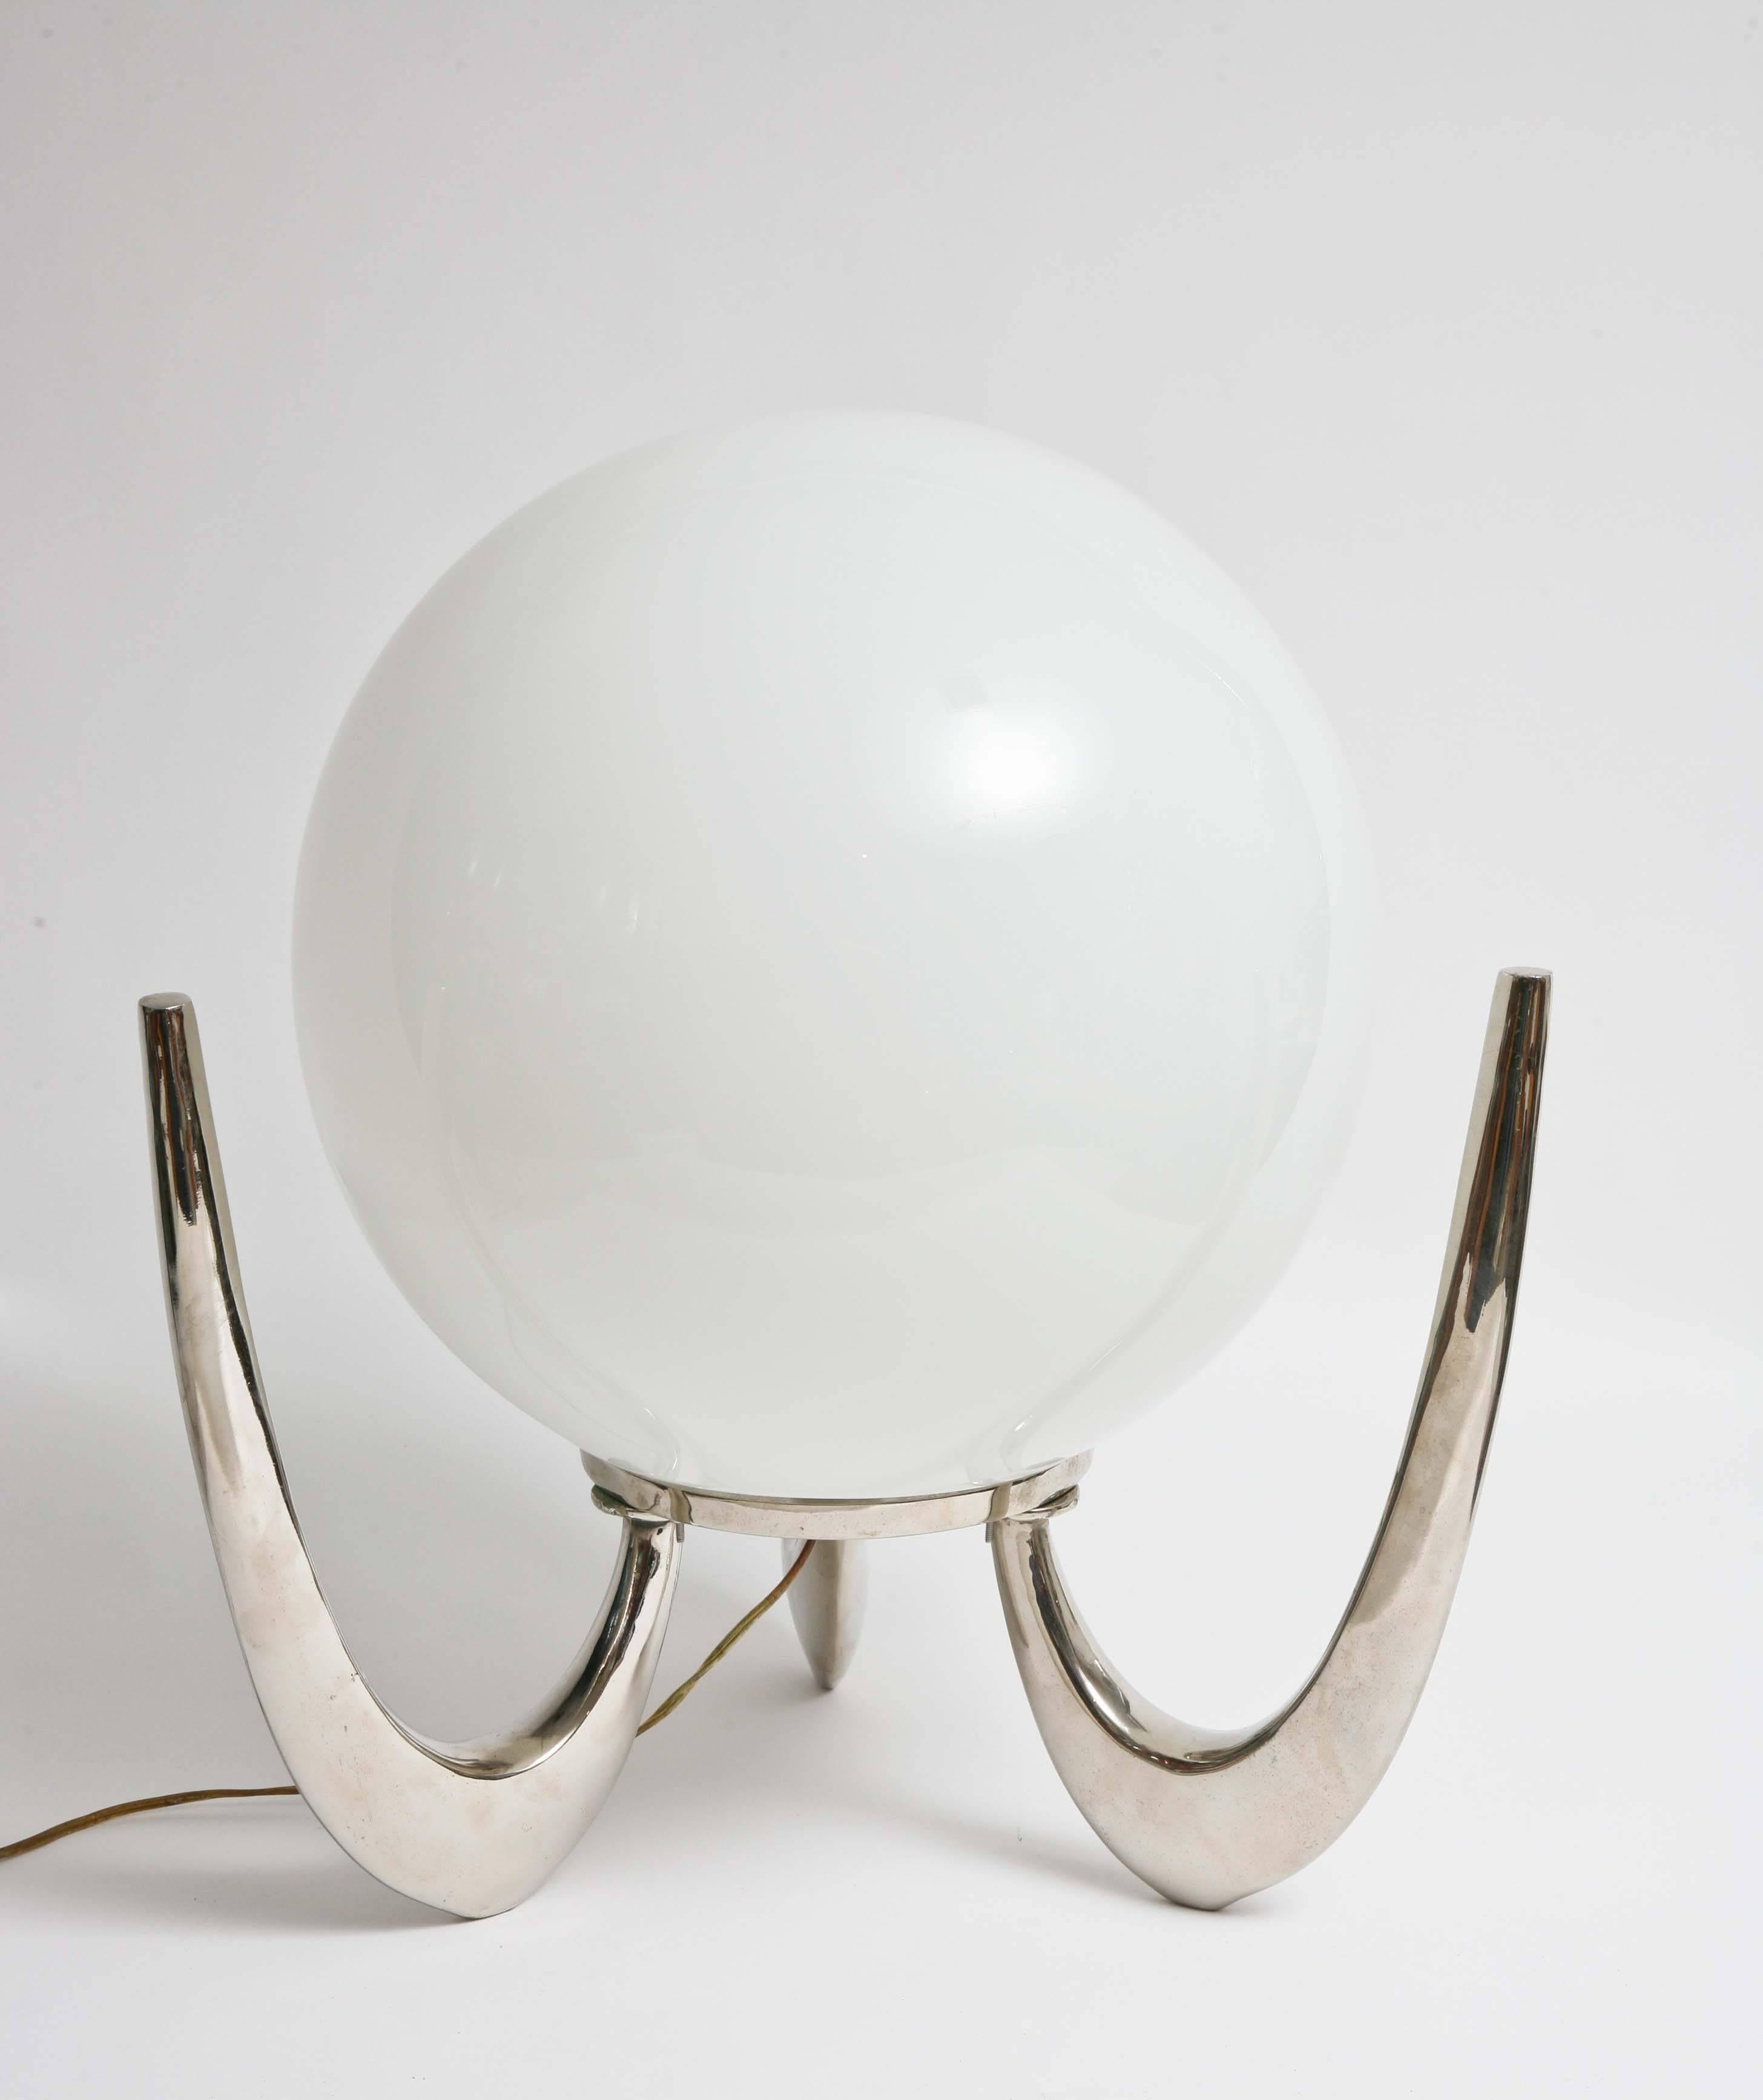 Metal frame plated fin. Large shiny glass orb center which conceals lighting mechanism. Three boomerang like supports act as legs. Very futuristic looking light fixture. Wiring is in working order and lamp is in very original condition.